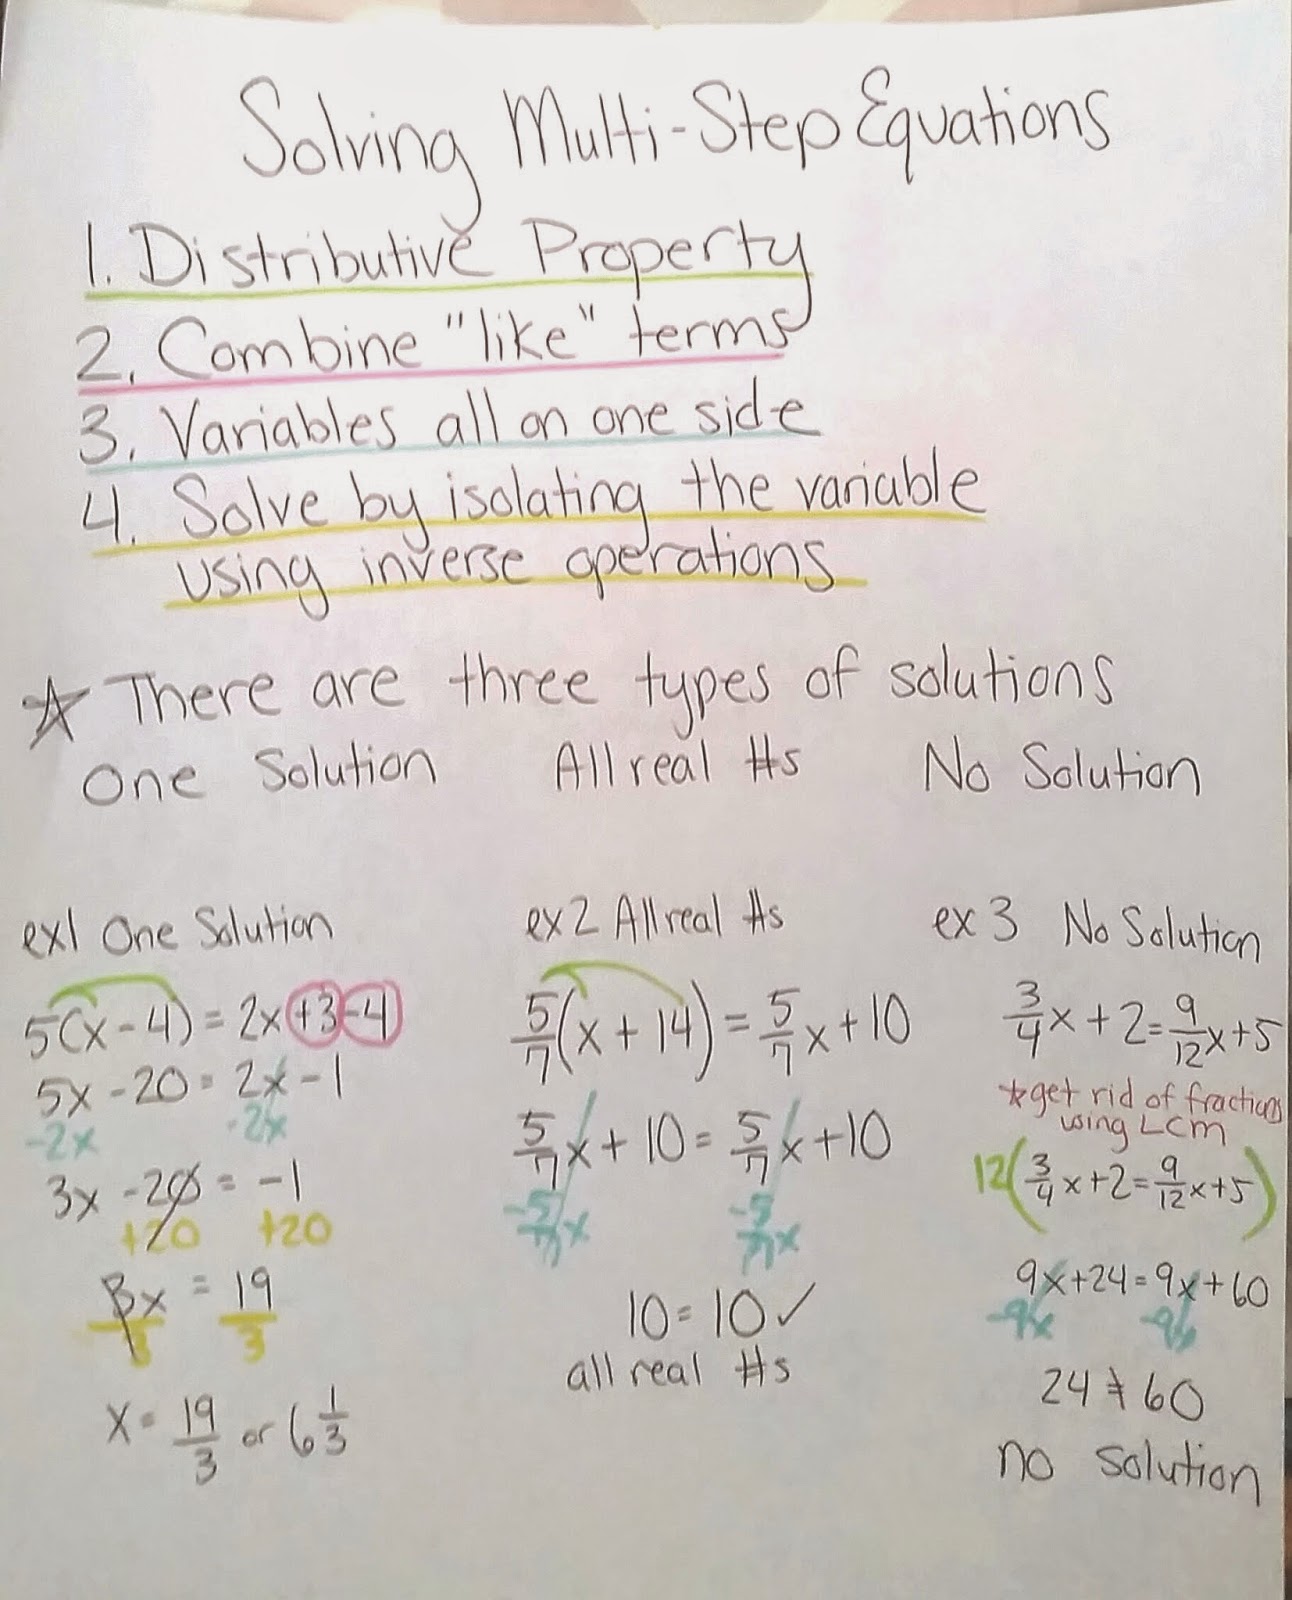 my homework lesson 9 equations with multiple operations